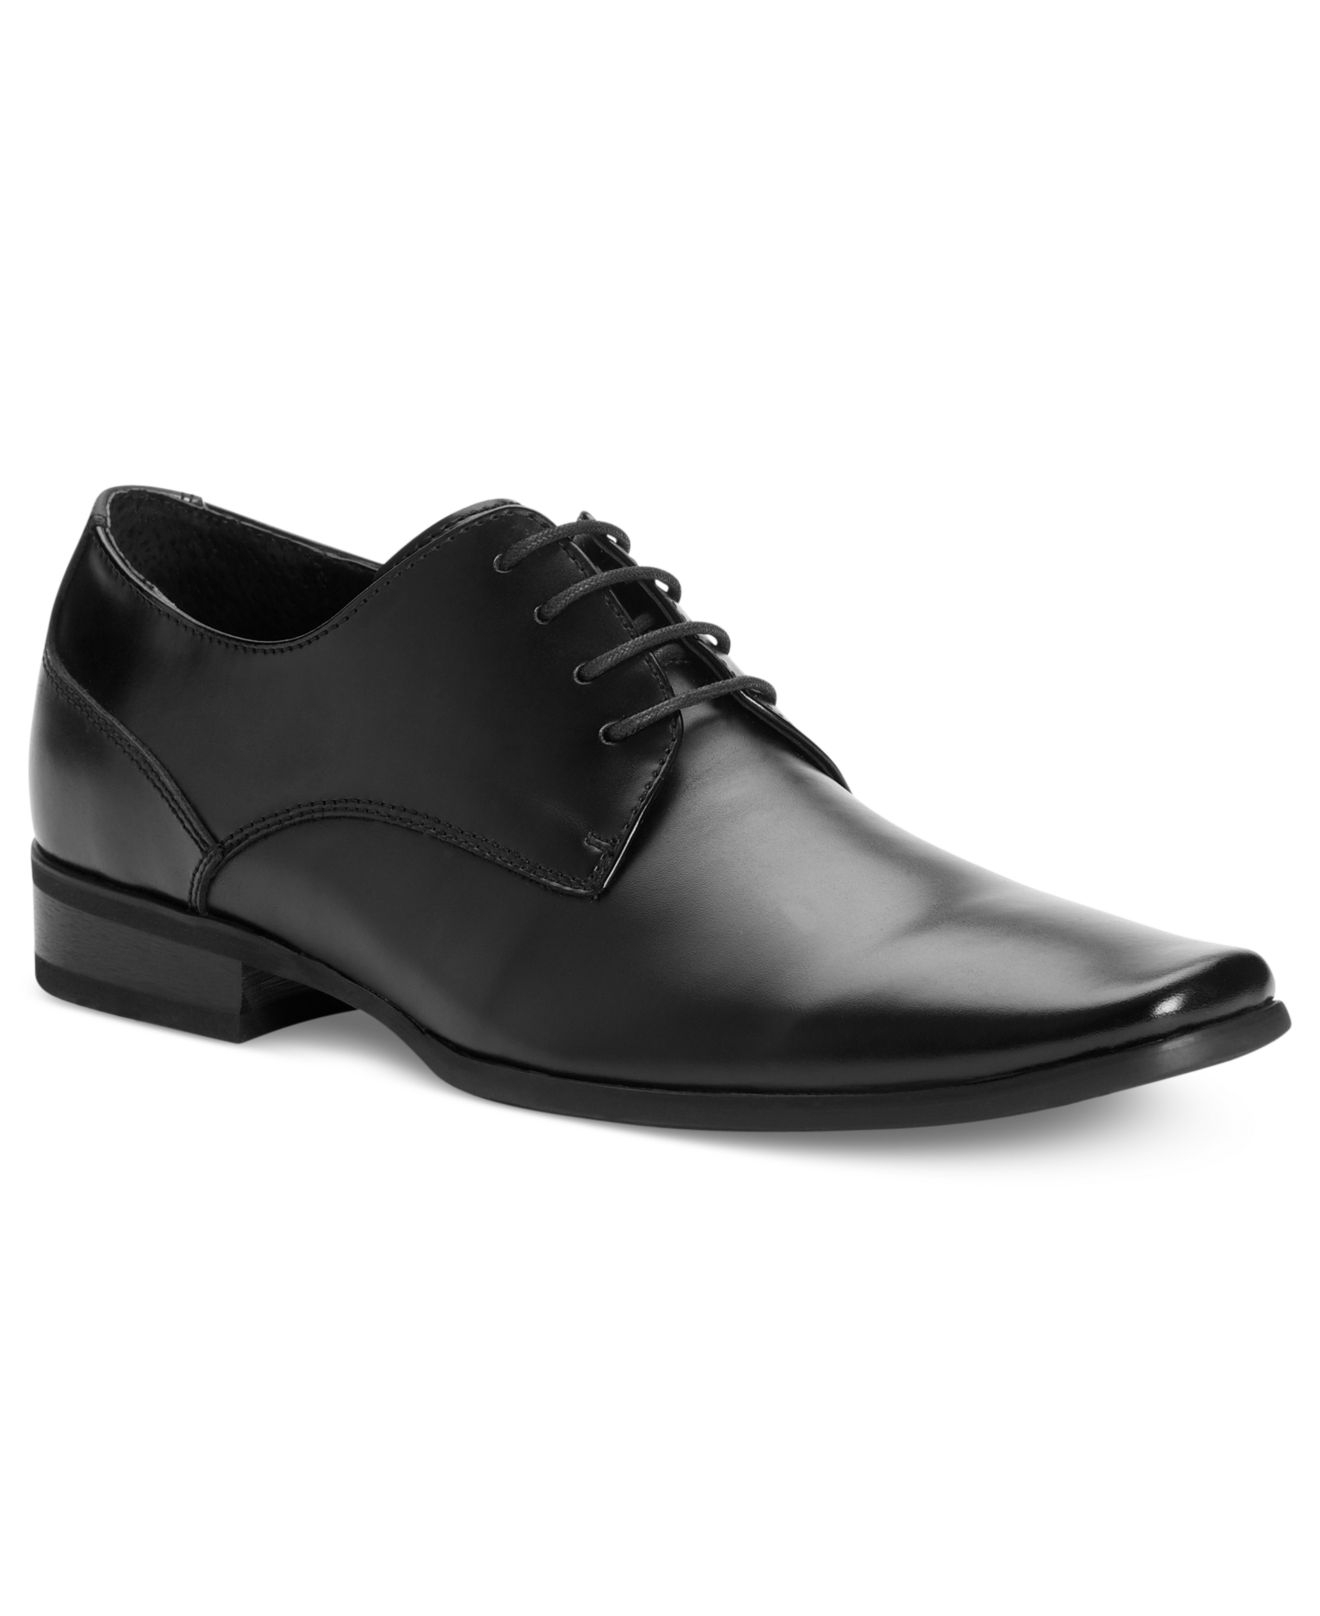 Calvin klein Brodie Leather Oxfords- Extended Widths Available in Black